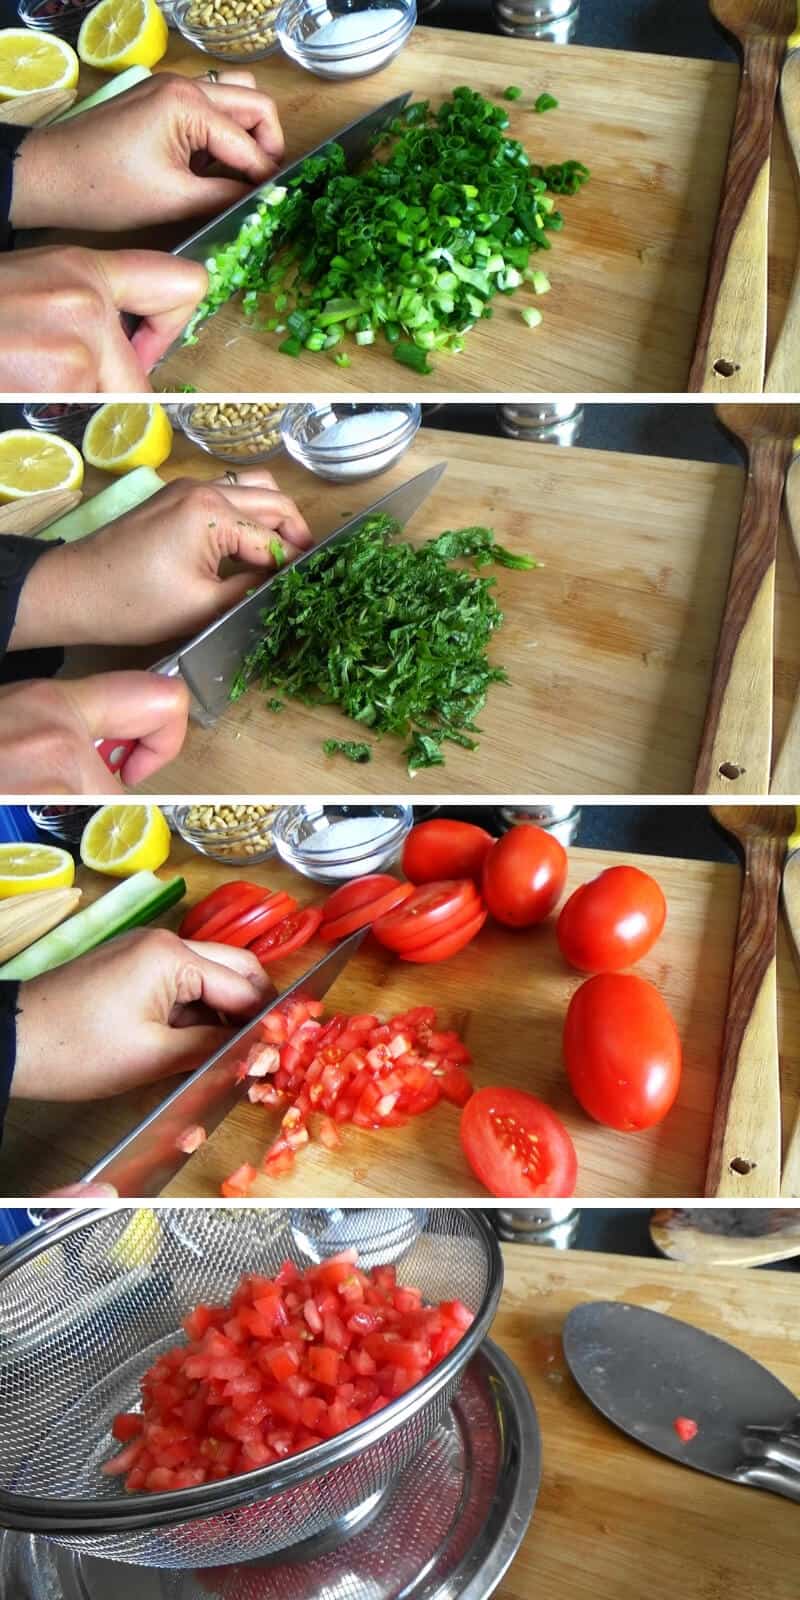 Chopping of mint, green onions and tomatoes for making the tabbouleh salad.